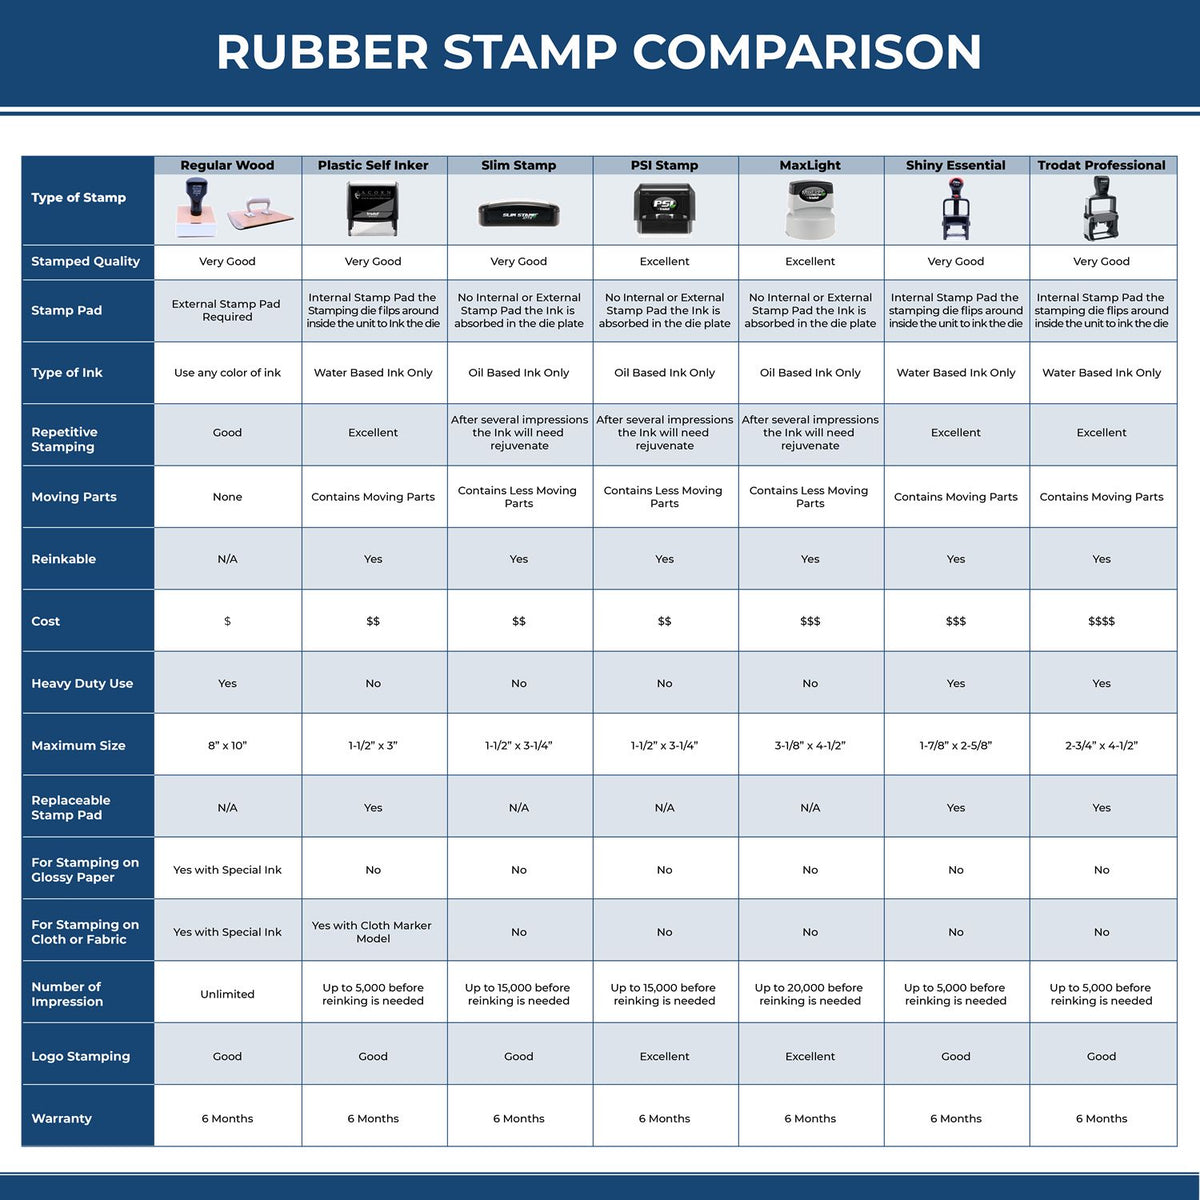 Large Correct And Hand Back To Teacher Rubber Stamp 4688R Rubber Stamp Comparison